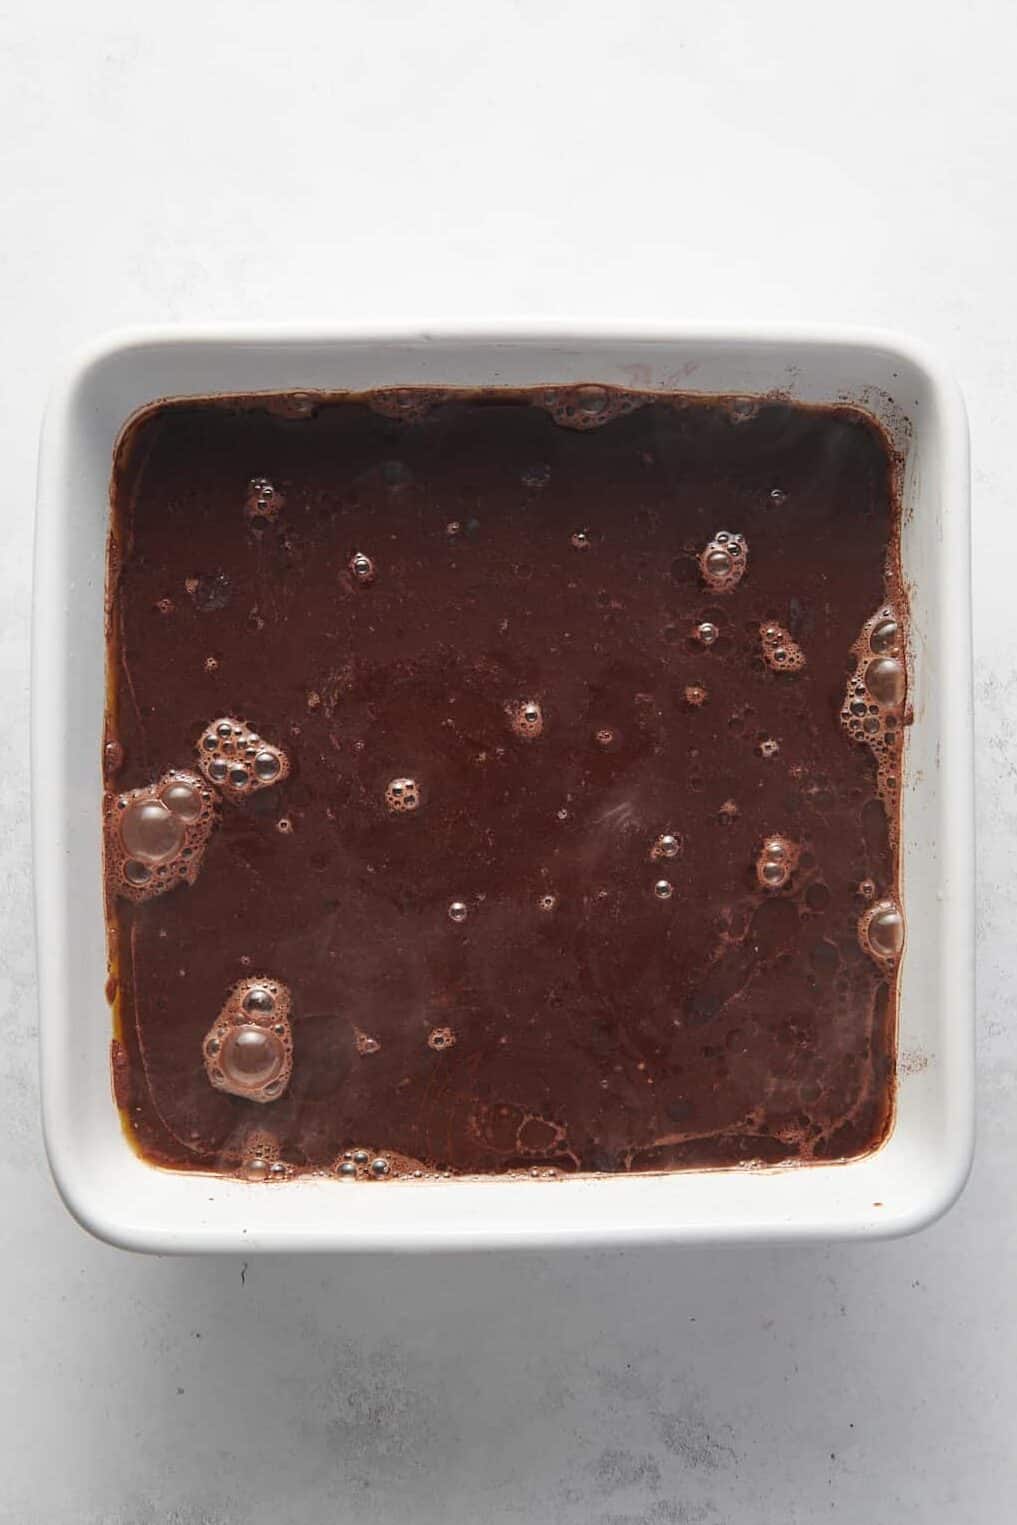 boiling water poured on top of the cocoa powder and sugar layered chocolate cake batter and melted butter mixture